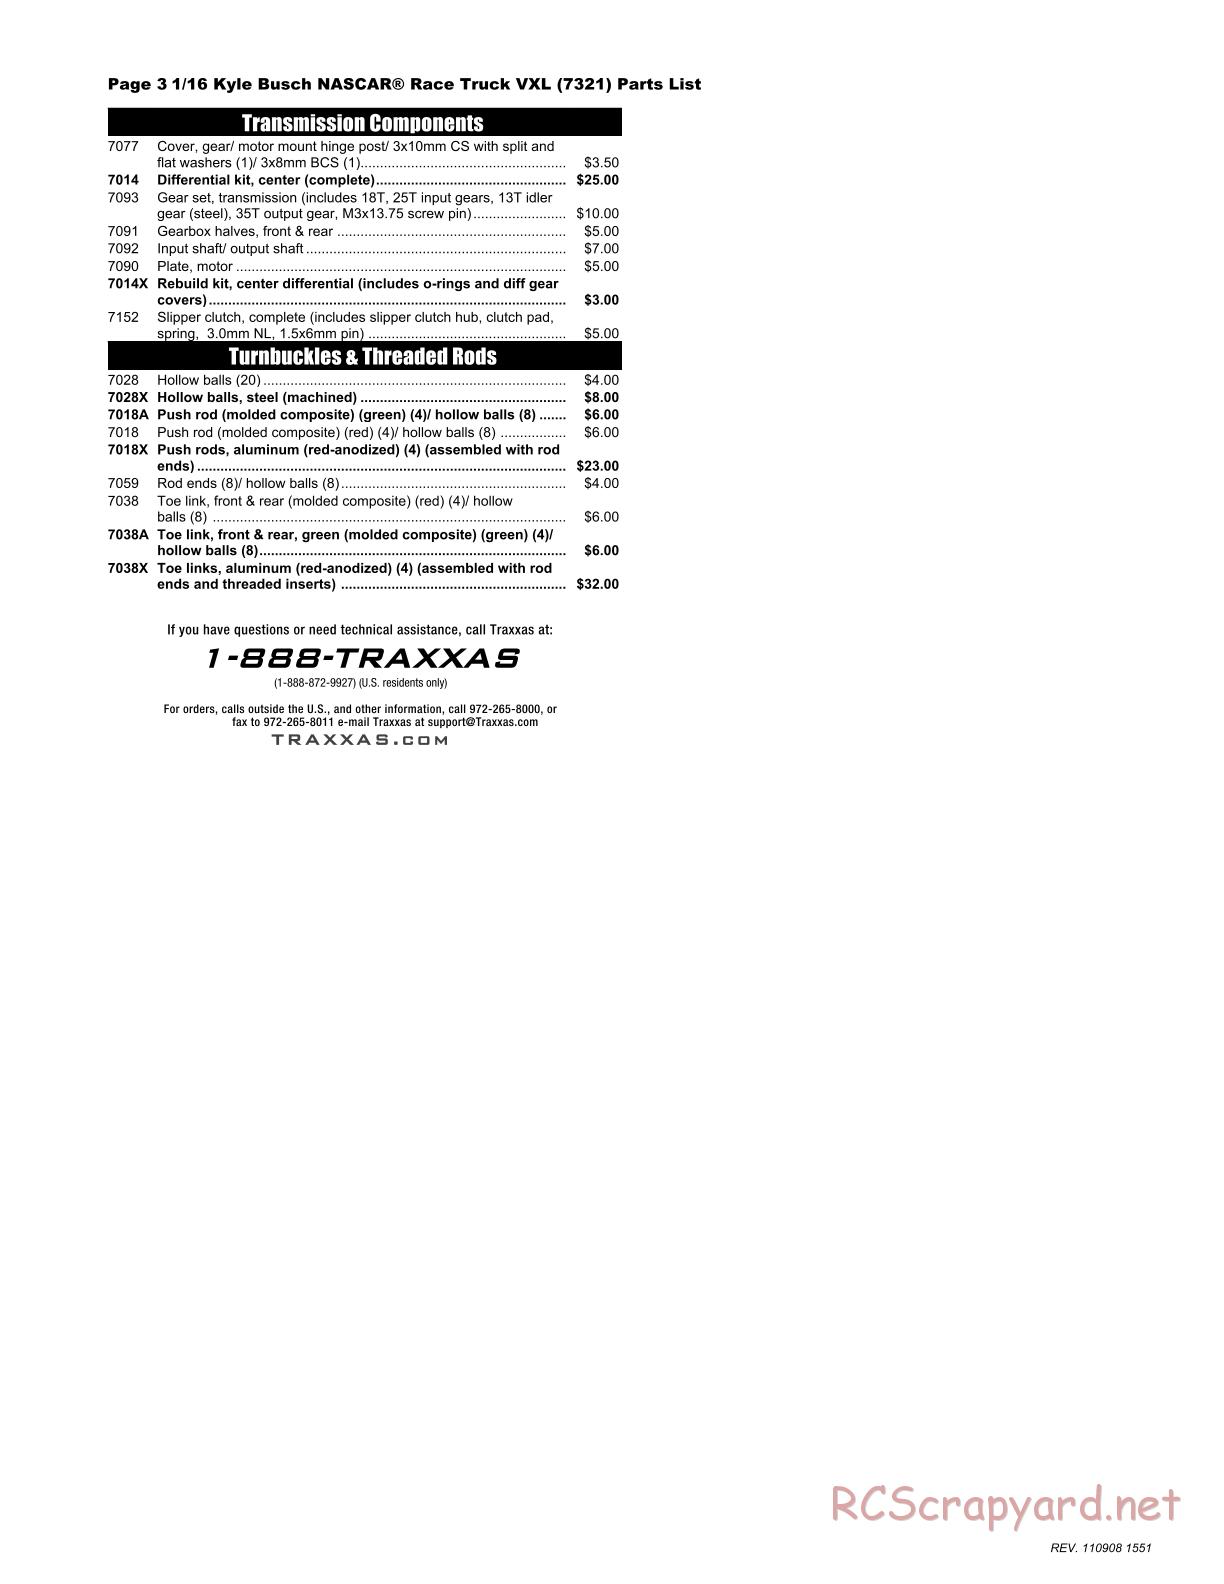 Traxxas - 1/16 Kyle Busch Race Replica (Brushless) (2011) - Parts List - Page 3